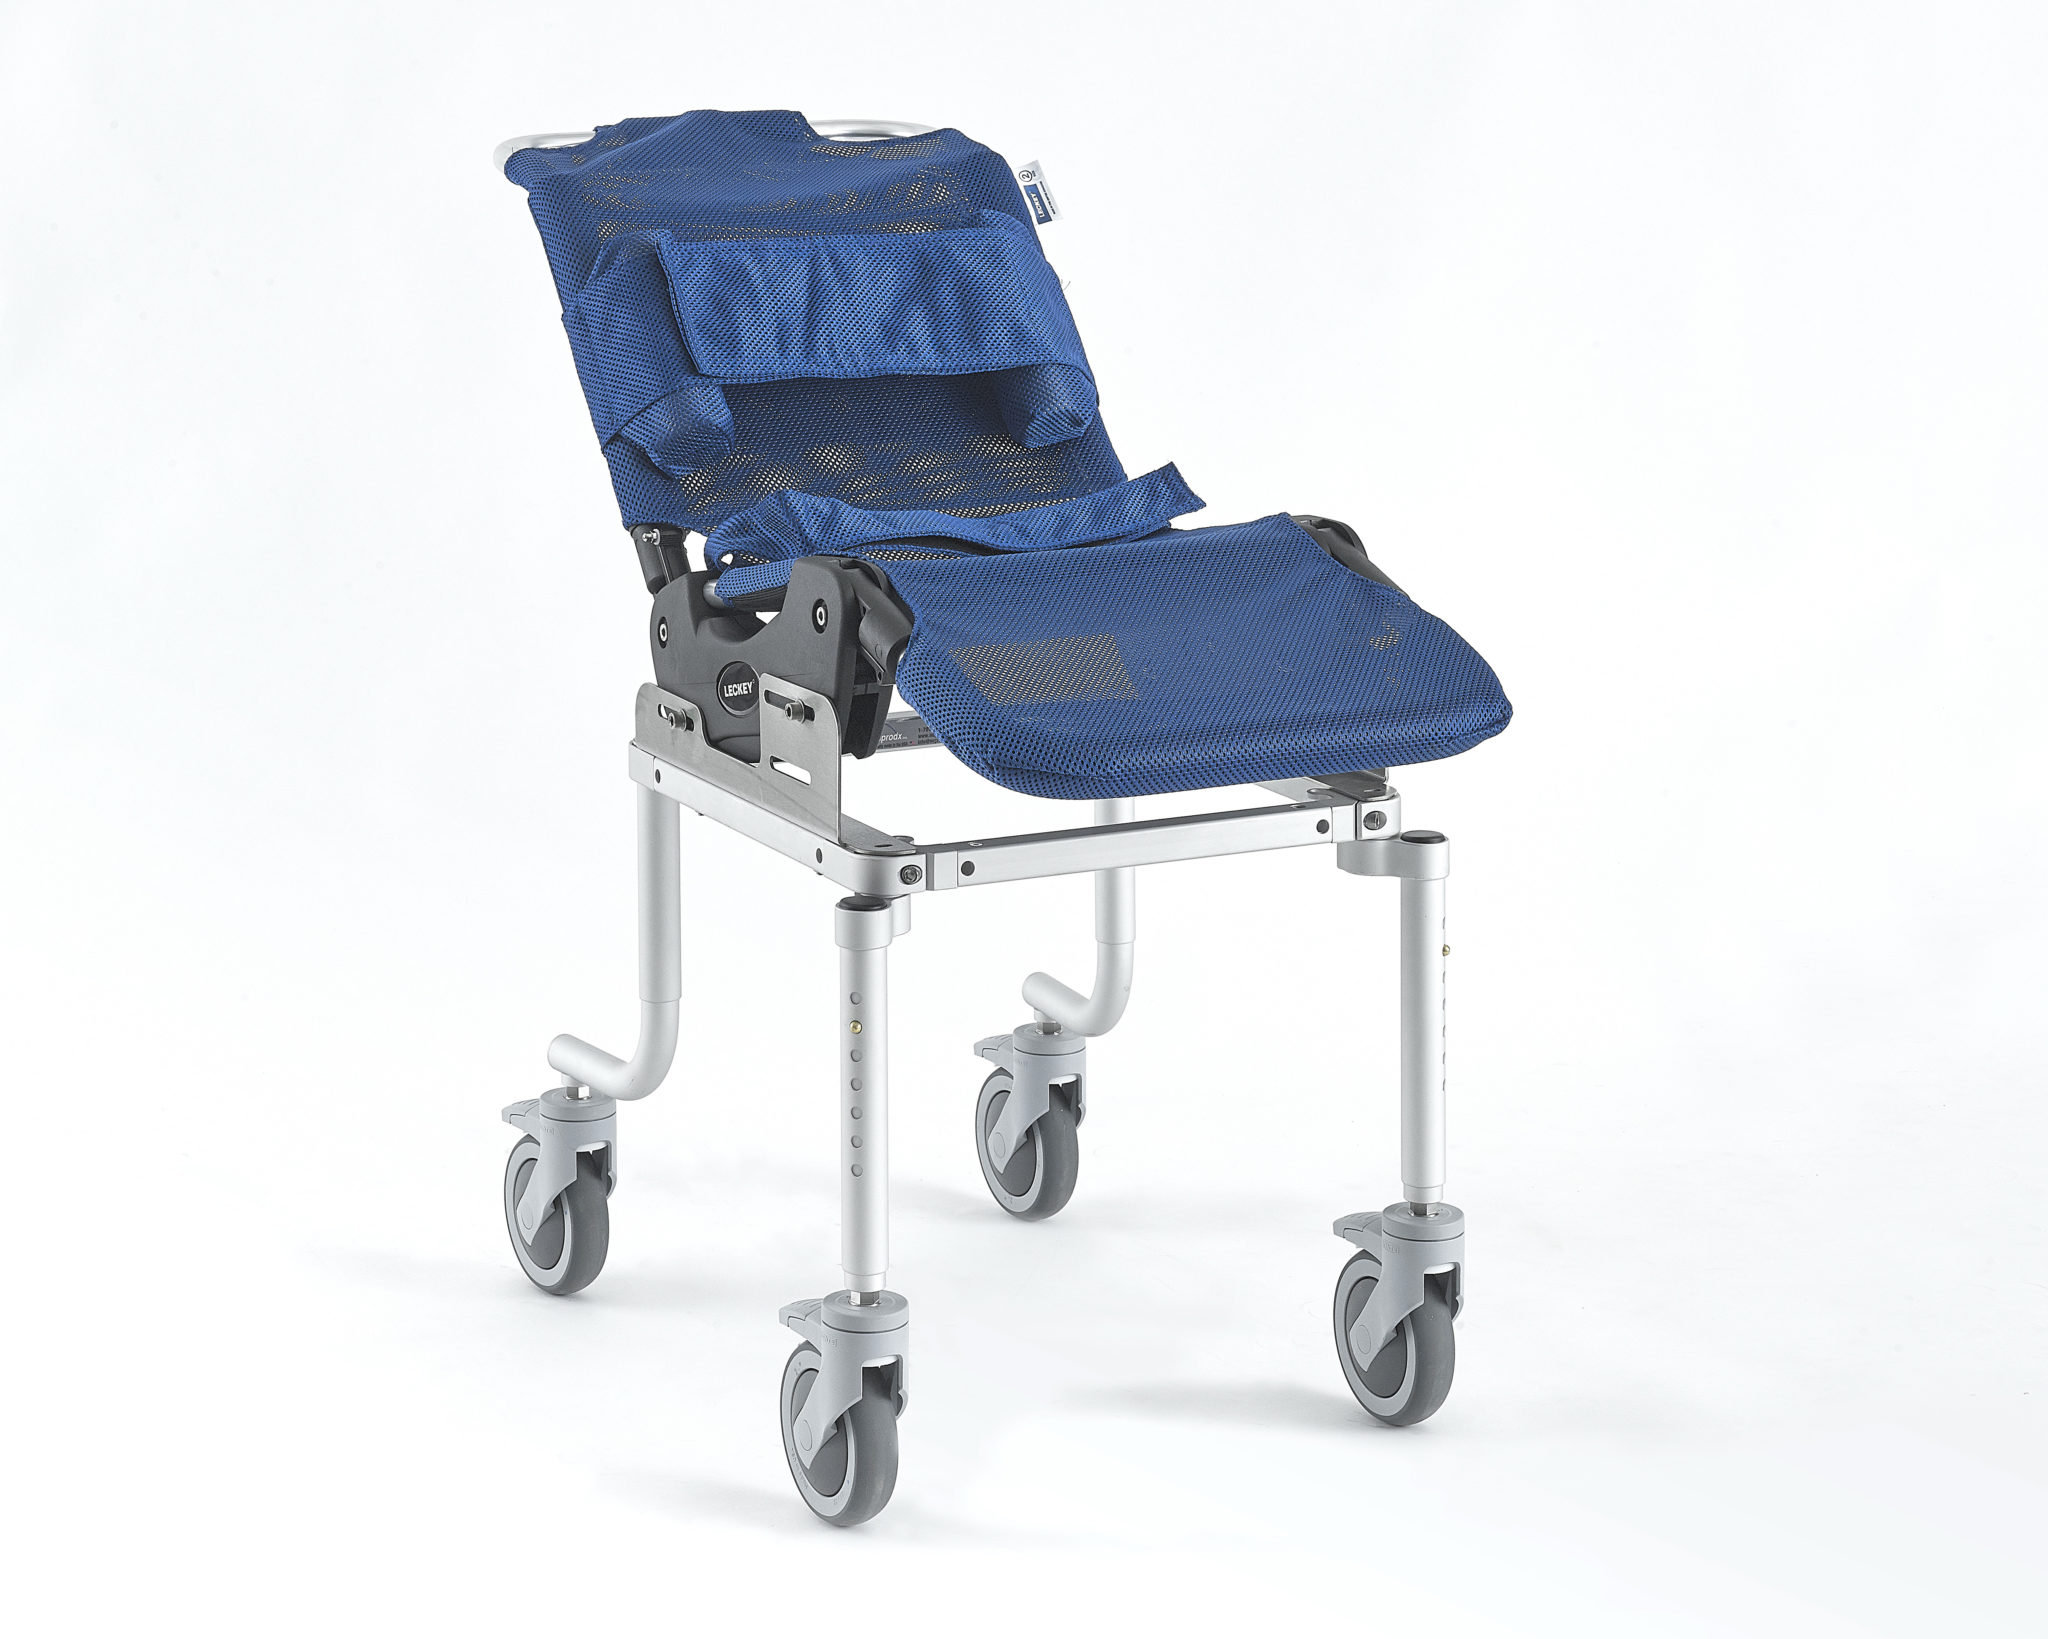 Mc4000leckey Pediatric Shower Chair For Barrier Free Showers